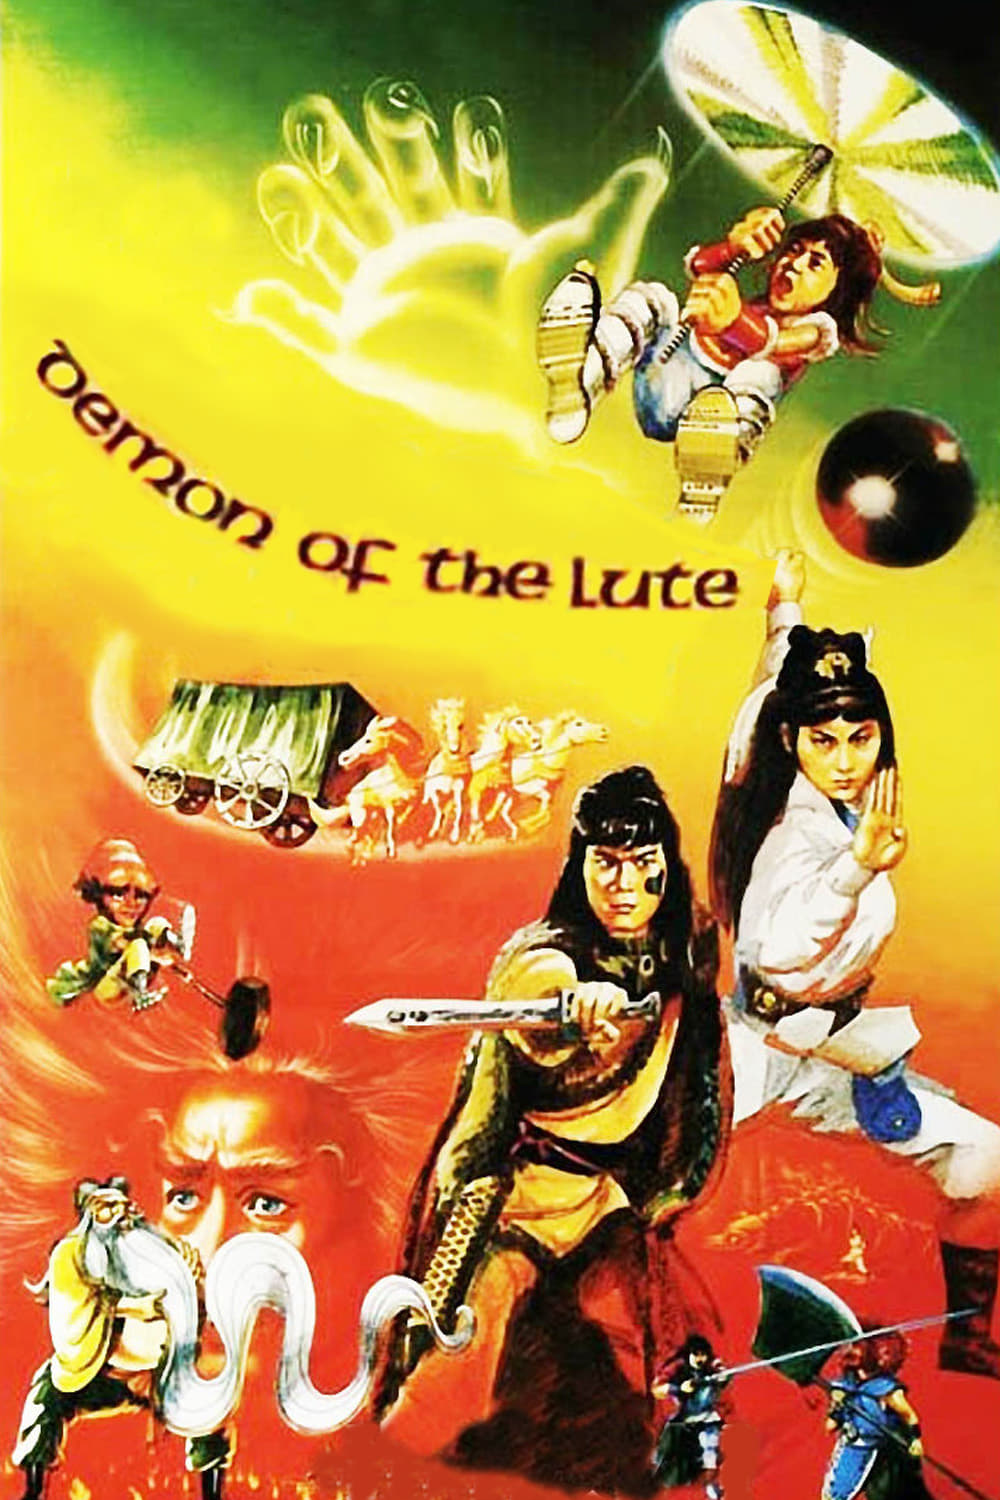 Demon of the Lute (1983)